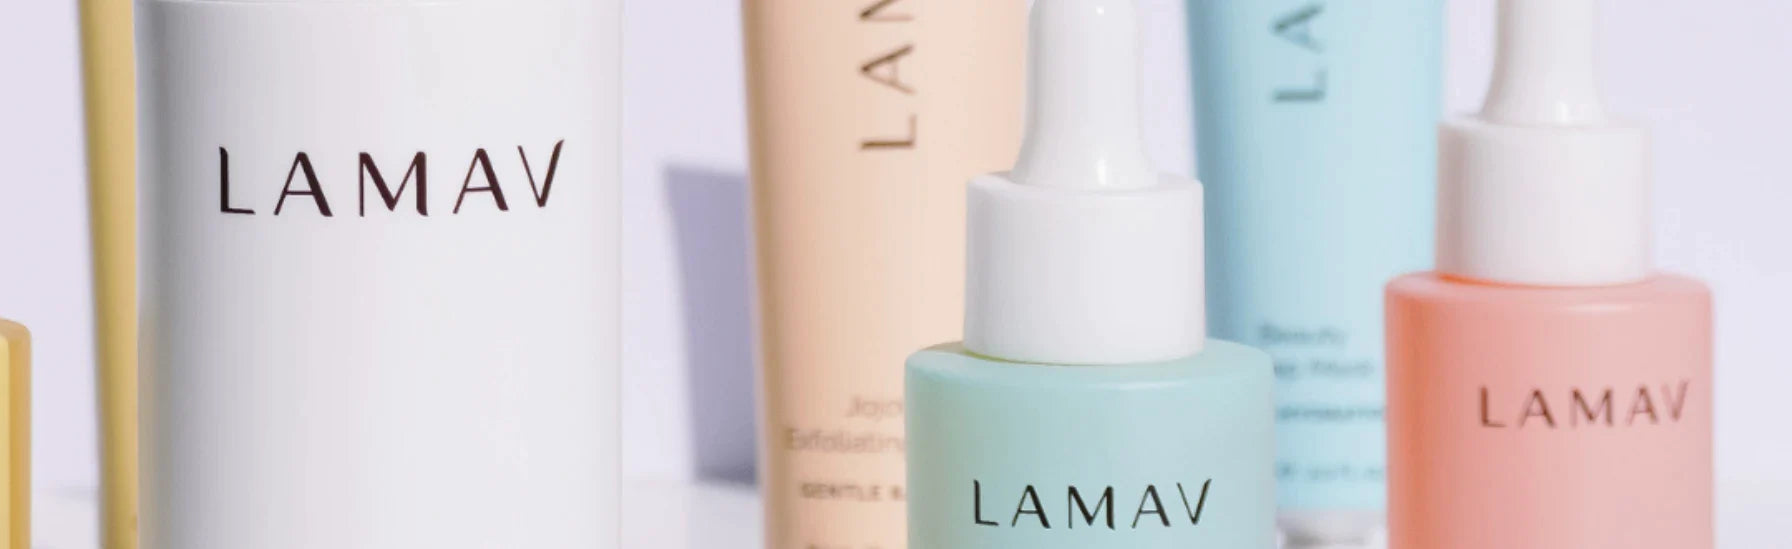 Discover LAMAV's organic skincare range at Vams Beauty, featuring Australian-made gentle exfoliating creams and soothing serums in minimalist pastel packaging.